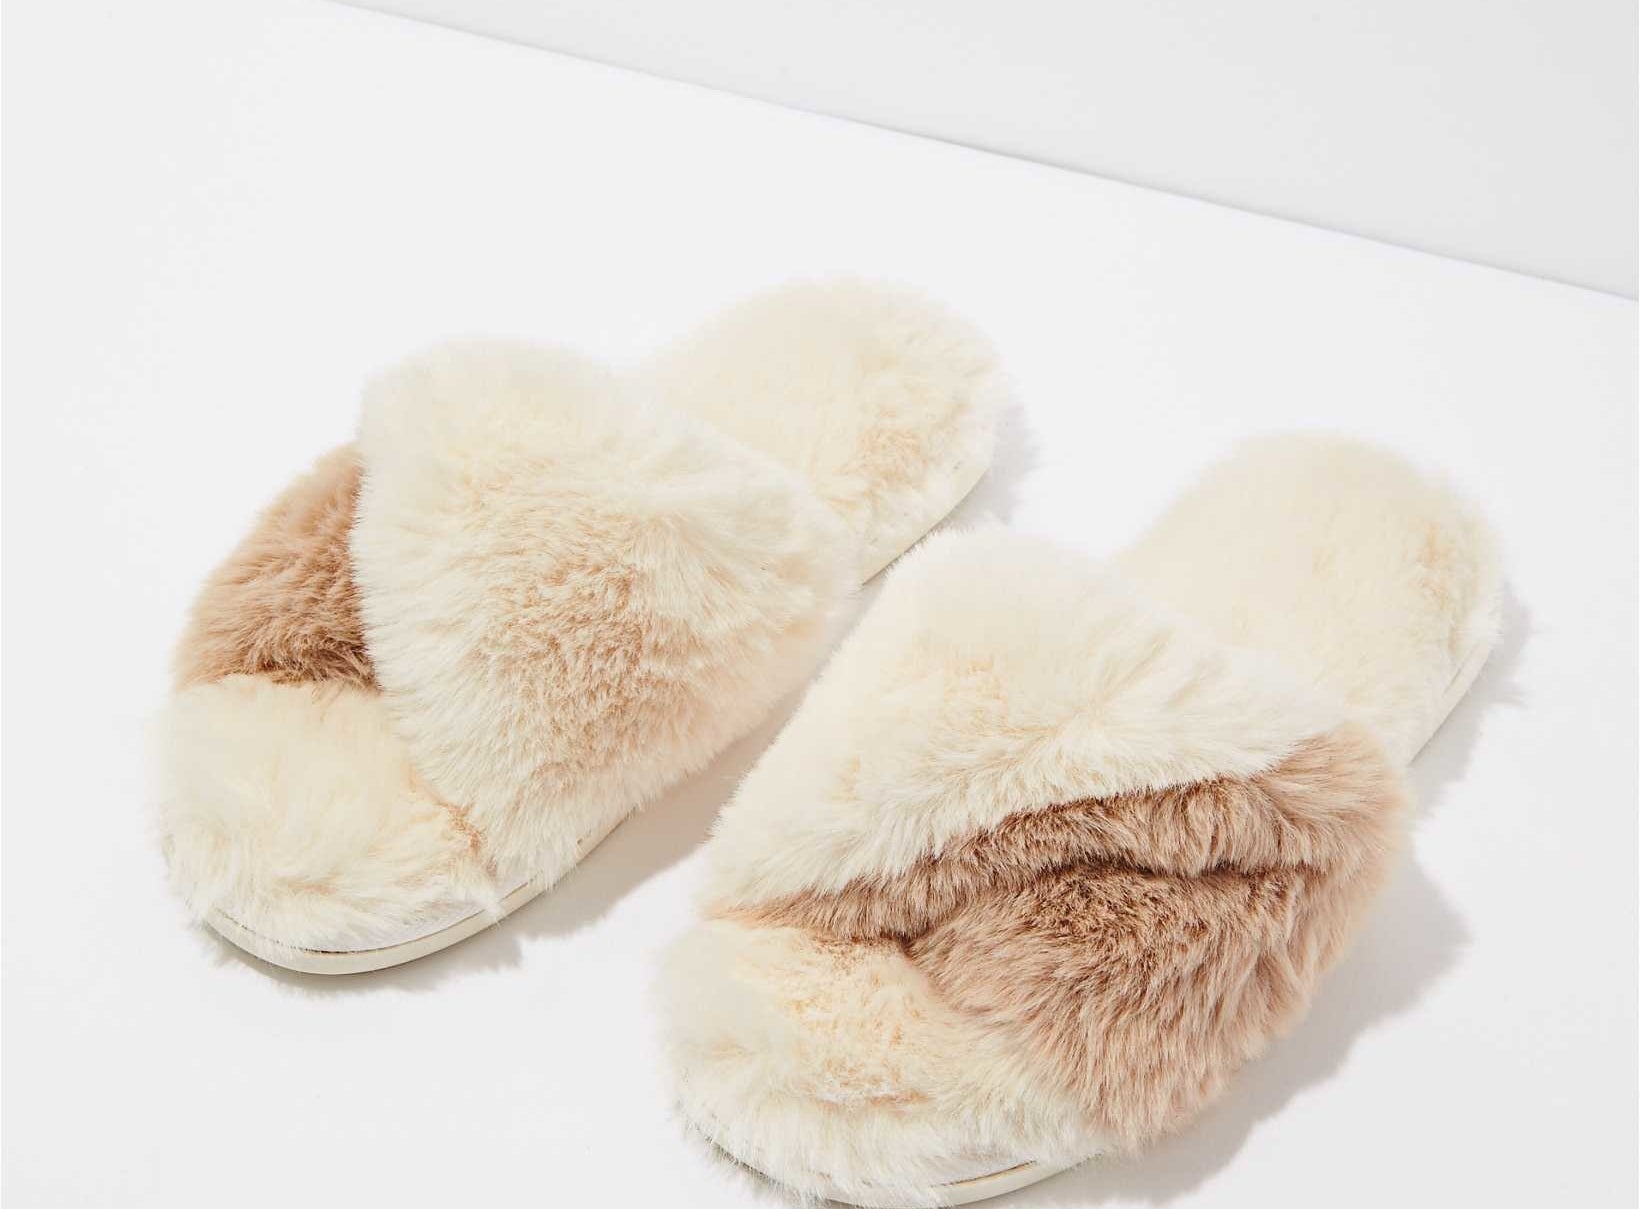 A pair of fuzzy twist slippers